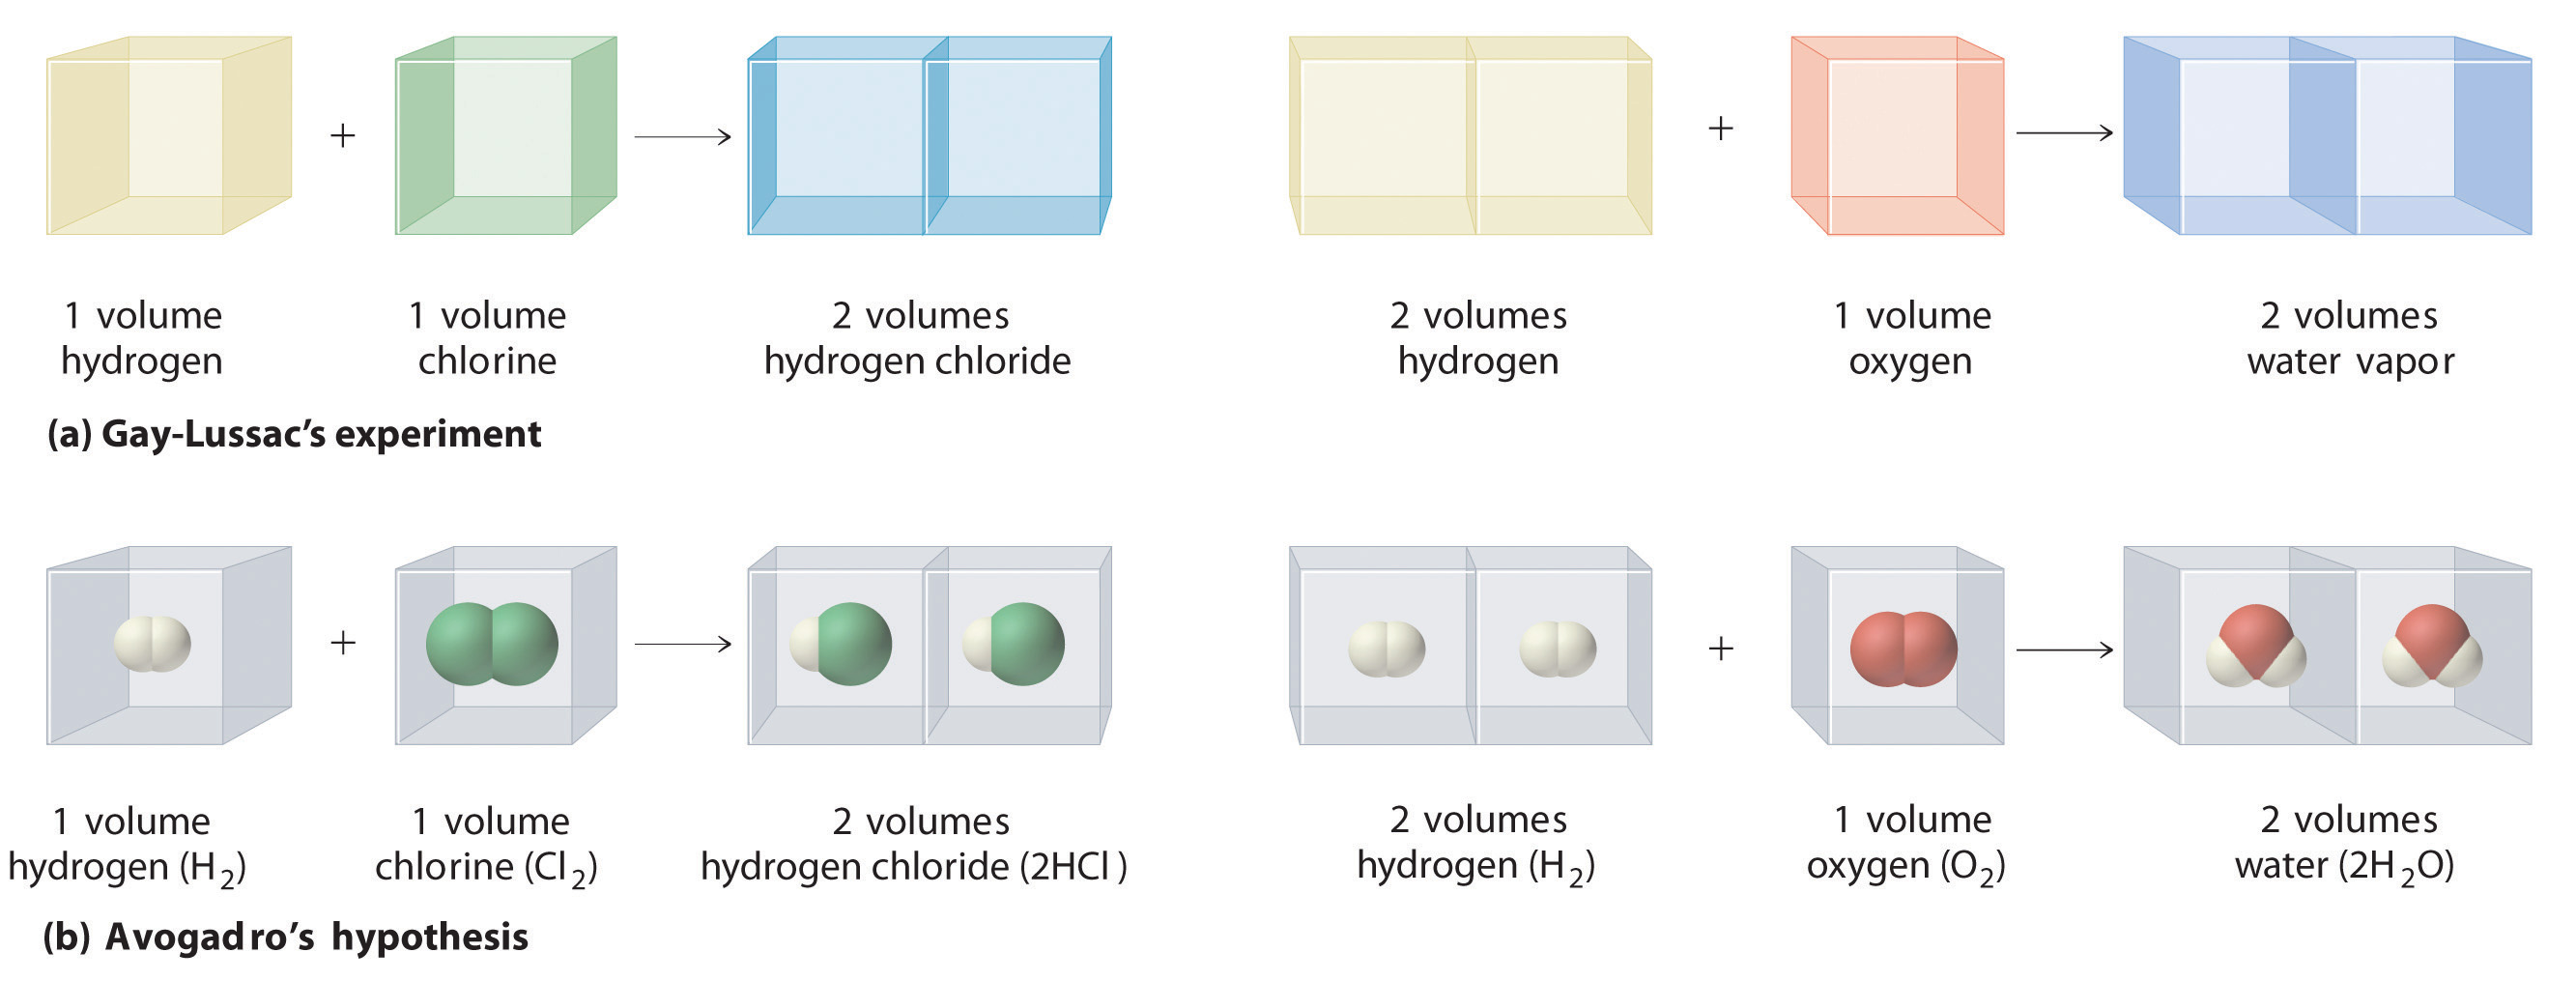 In the Gay-Lussac's experiment, 1 volume of hydrogen combines with 1 volume of chlorine to form two volumes of hydrogen chloride. 2 volumes of hydrogen combine with one volume of oxygen to form two volumes of water. In Avogadro's hypothesis, one volume of hydrogen (H2) combines with one volume of chlorine (Cl2) to form two volumes of hydrogen chloride (2HCl). Two volumes of hydrogen (H2) reacts with one volume of oxygen (O2) to form two volumes of water (2H2O).